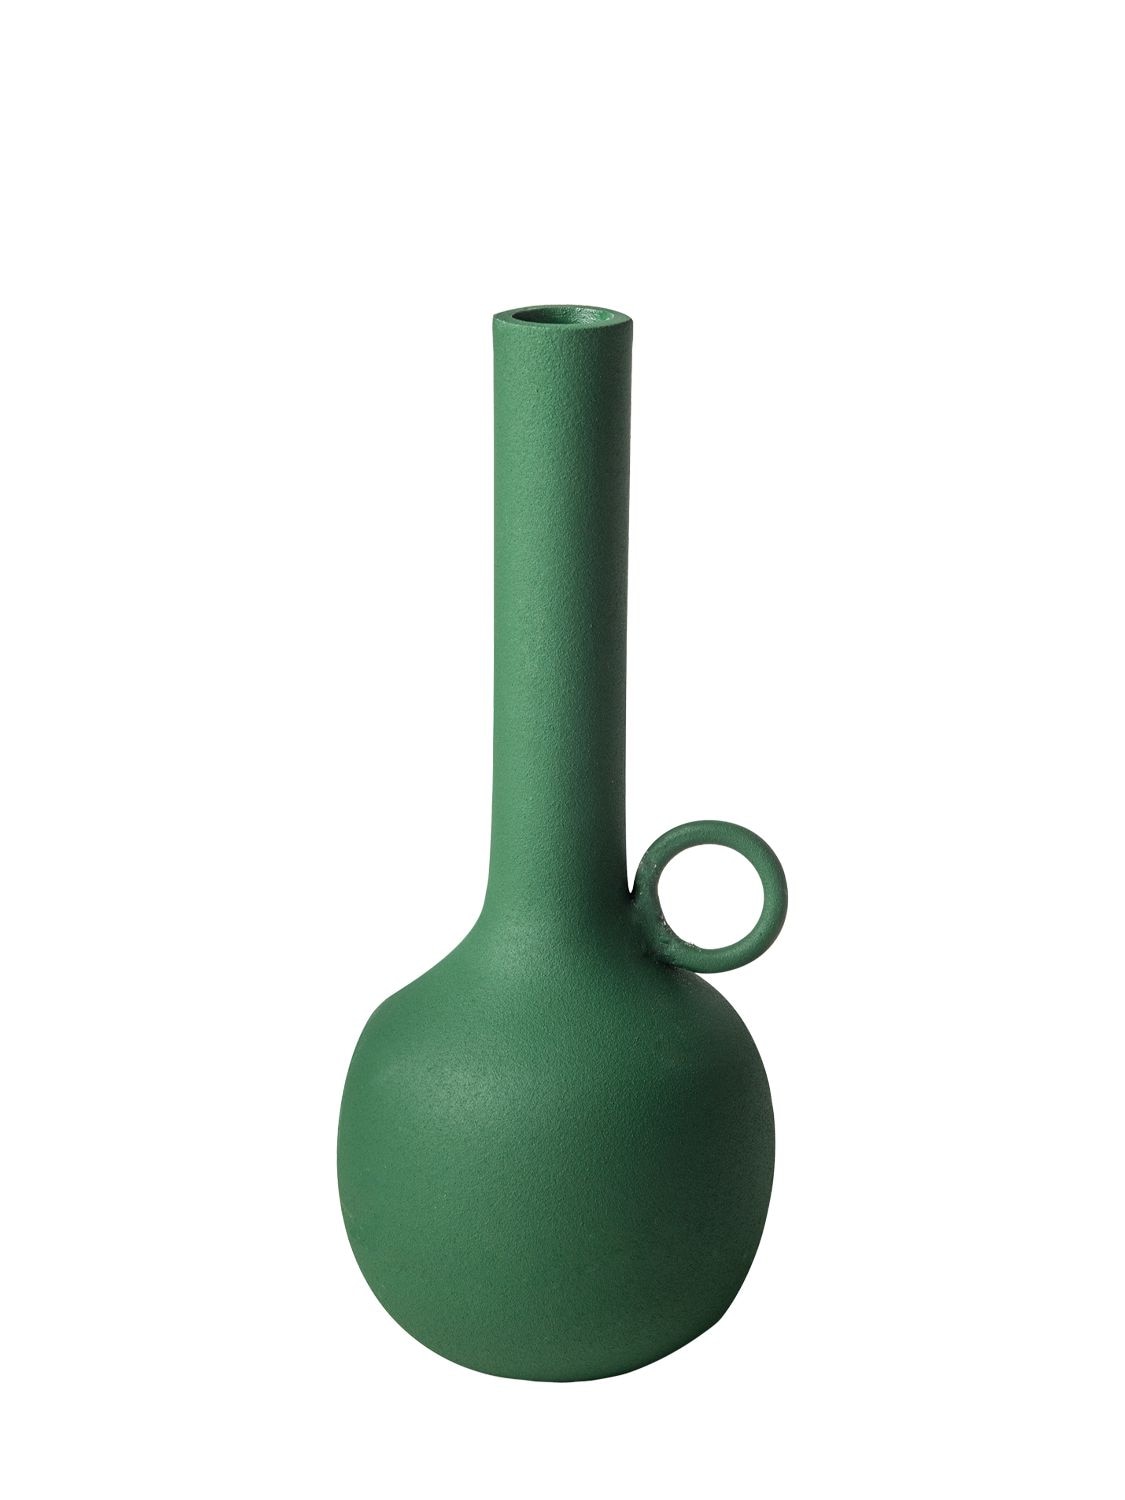 Image of Spartan Medium Green Candle Holder